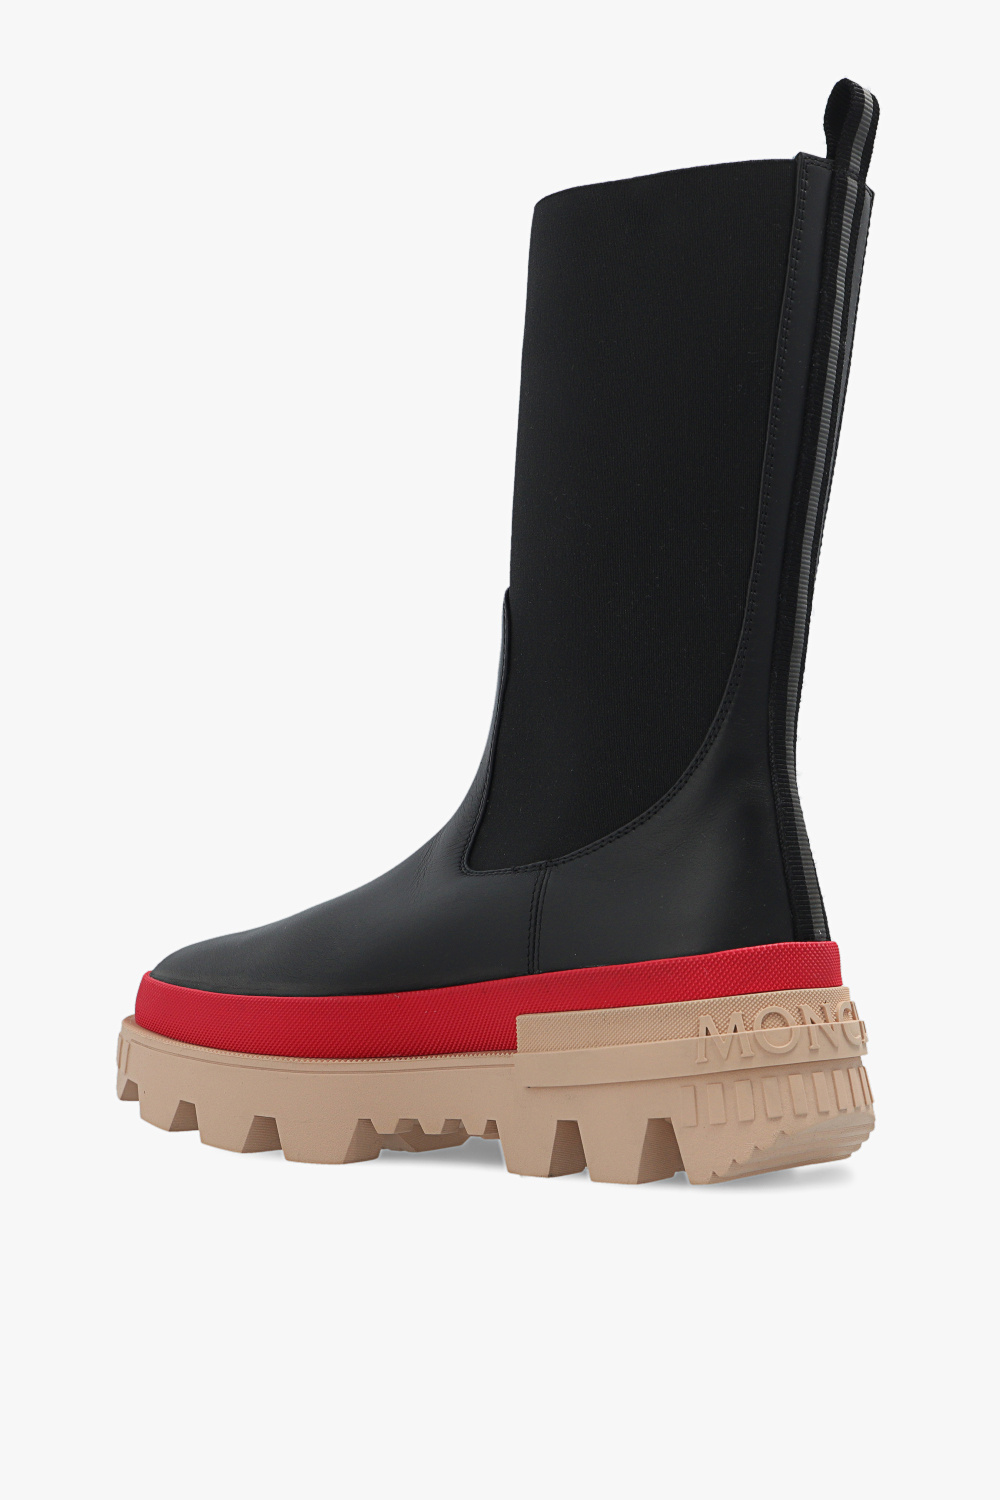 Moncler ‘Neue’ ankle boots